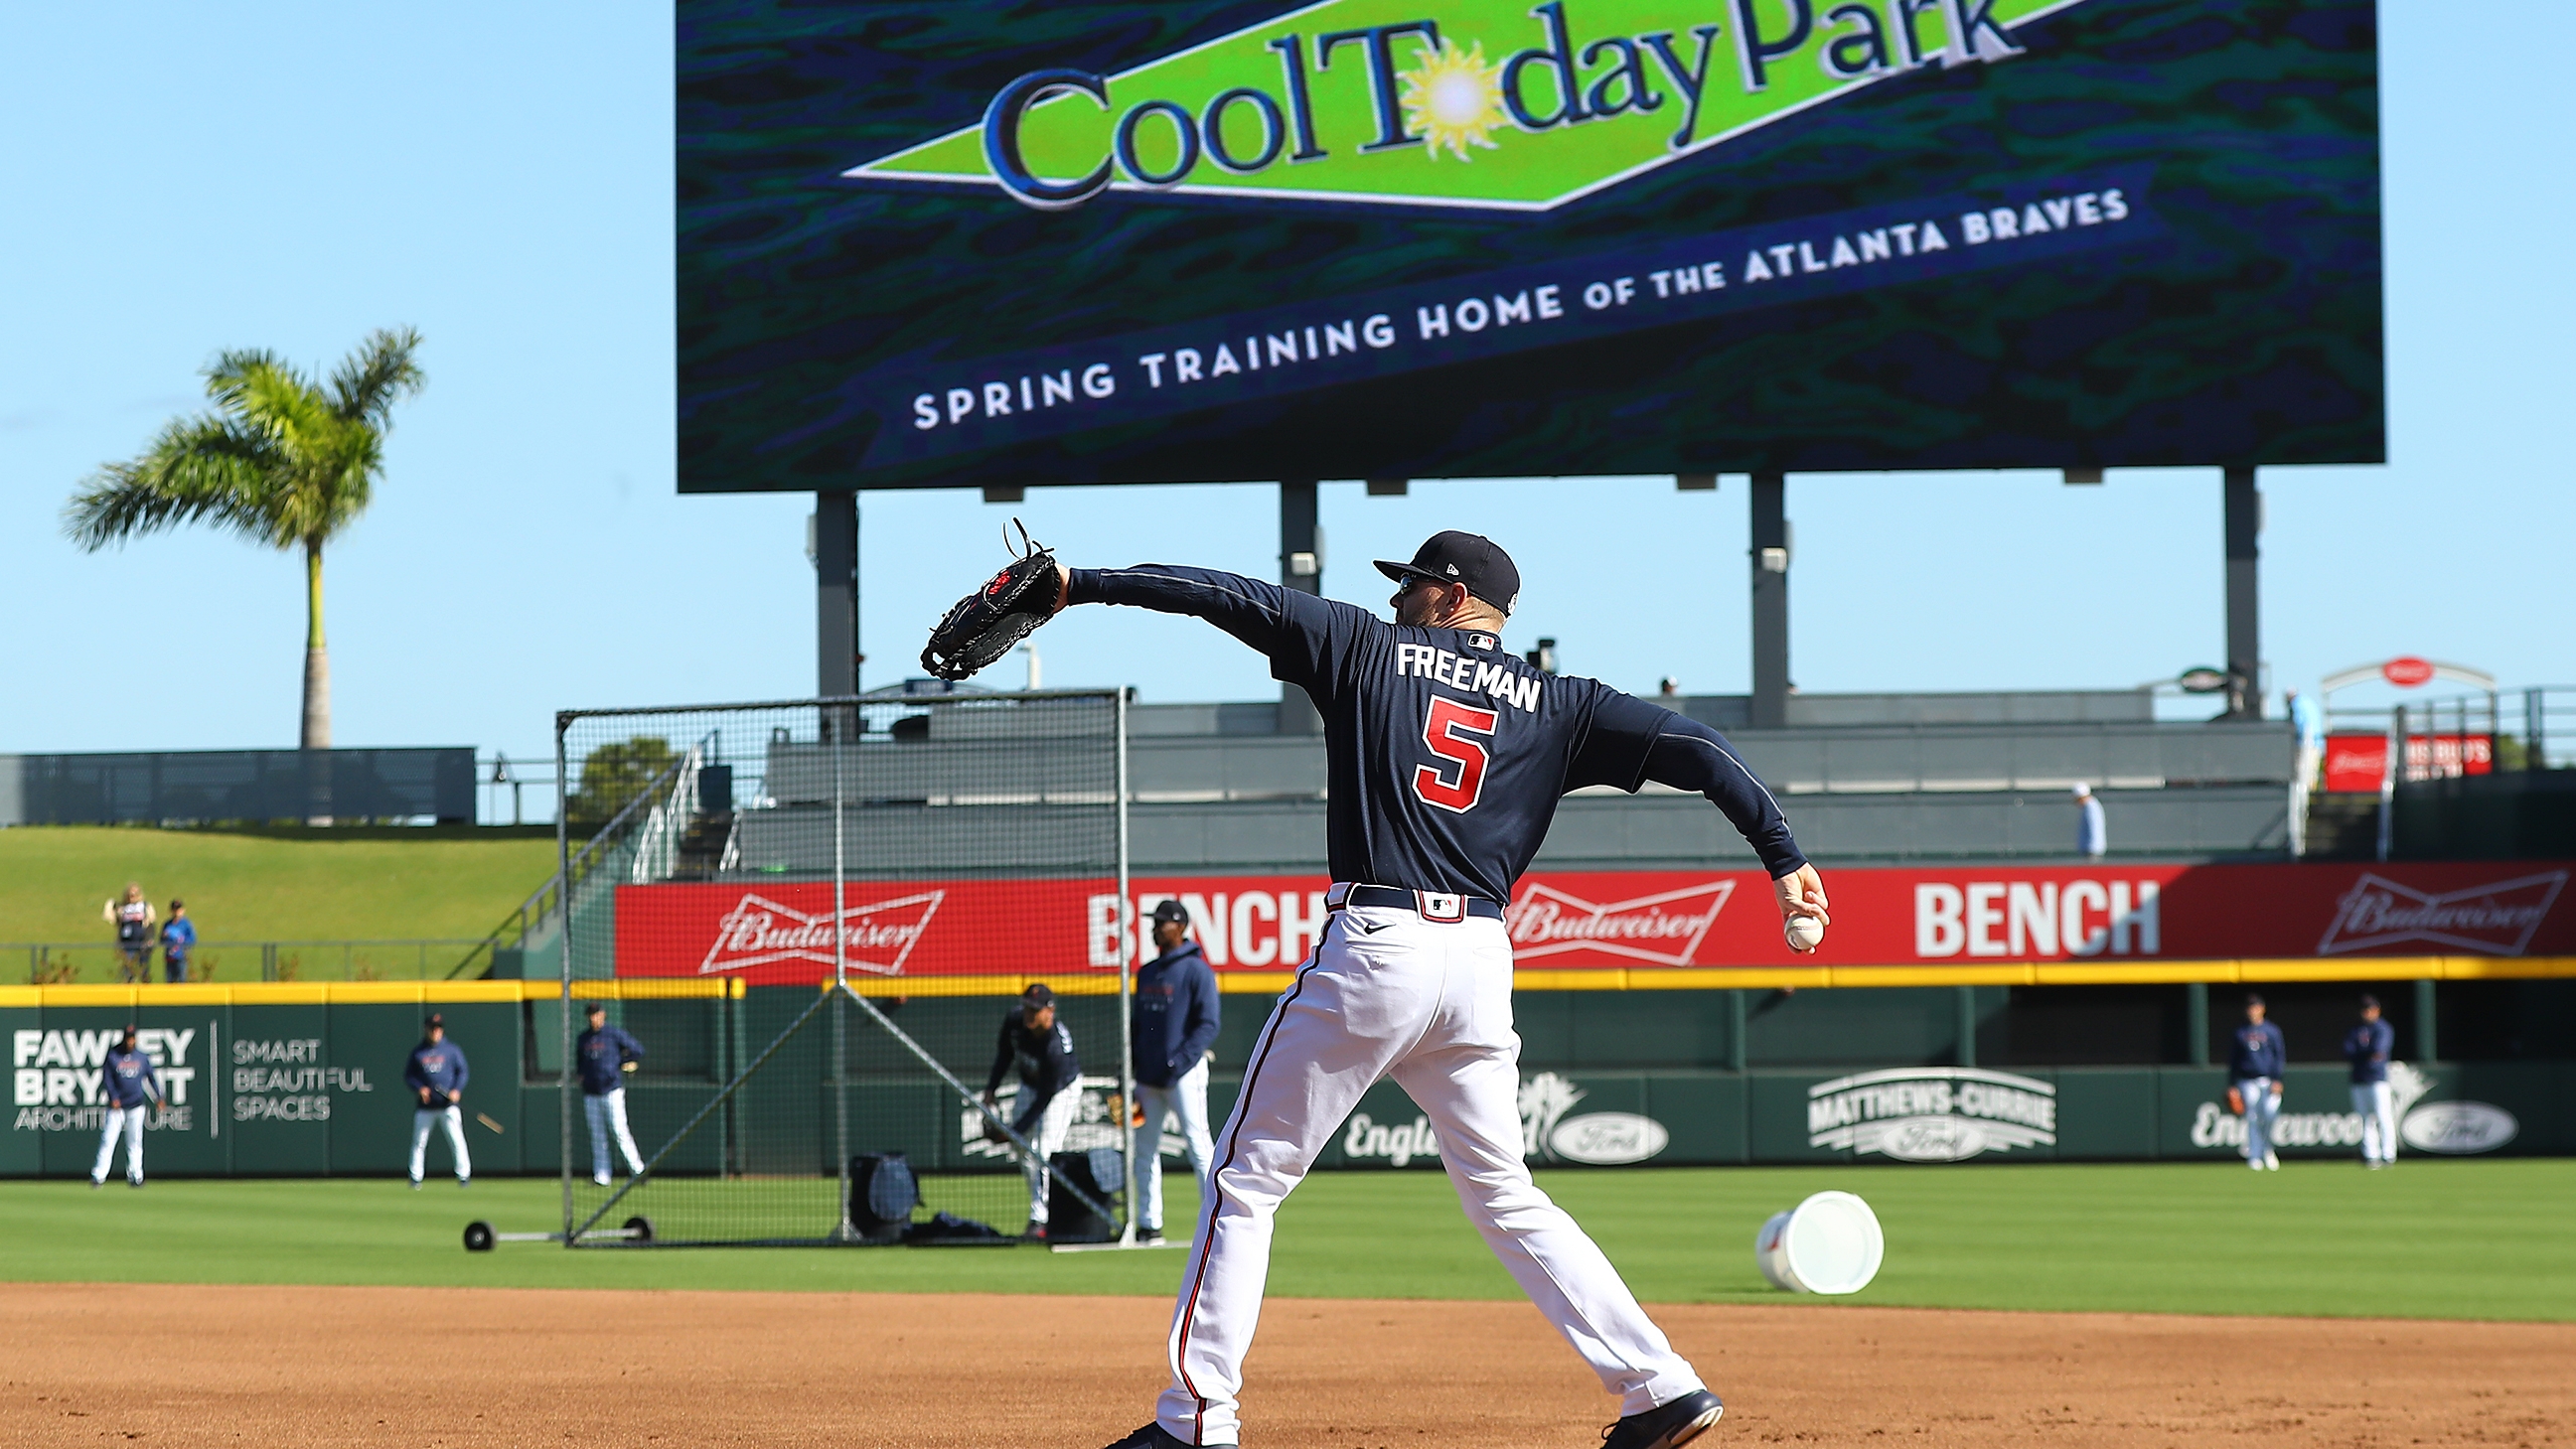 The Atlanta Braves are on deck for spring training at CoolToday